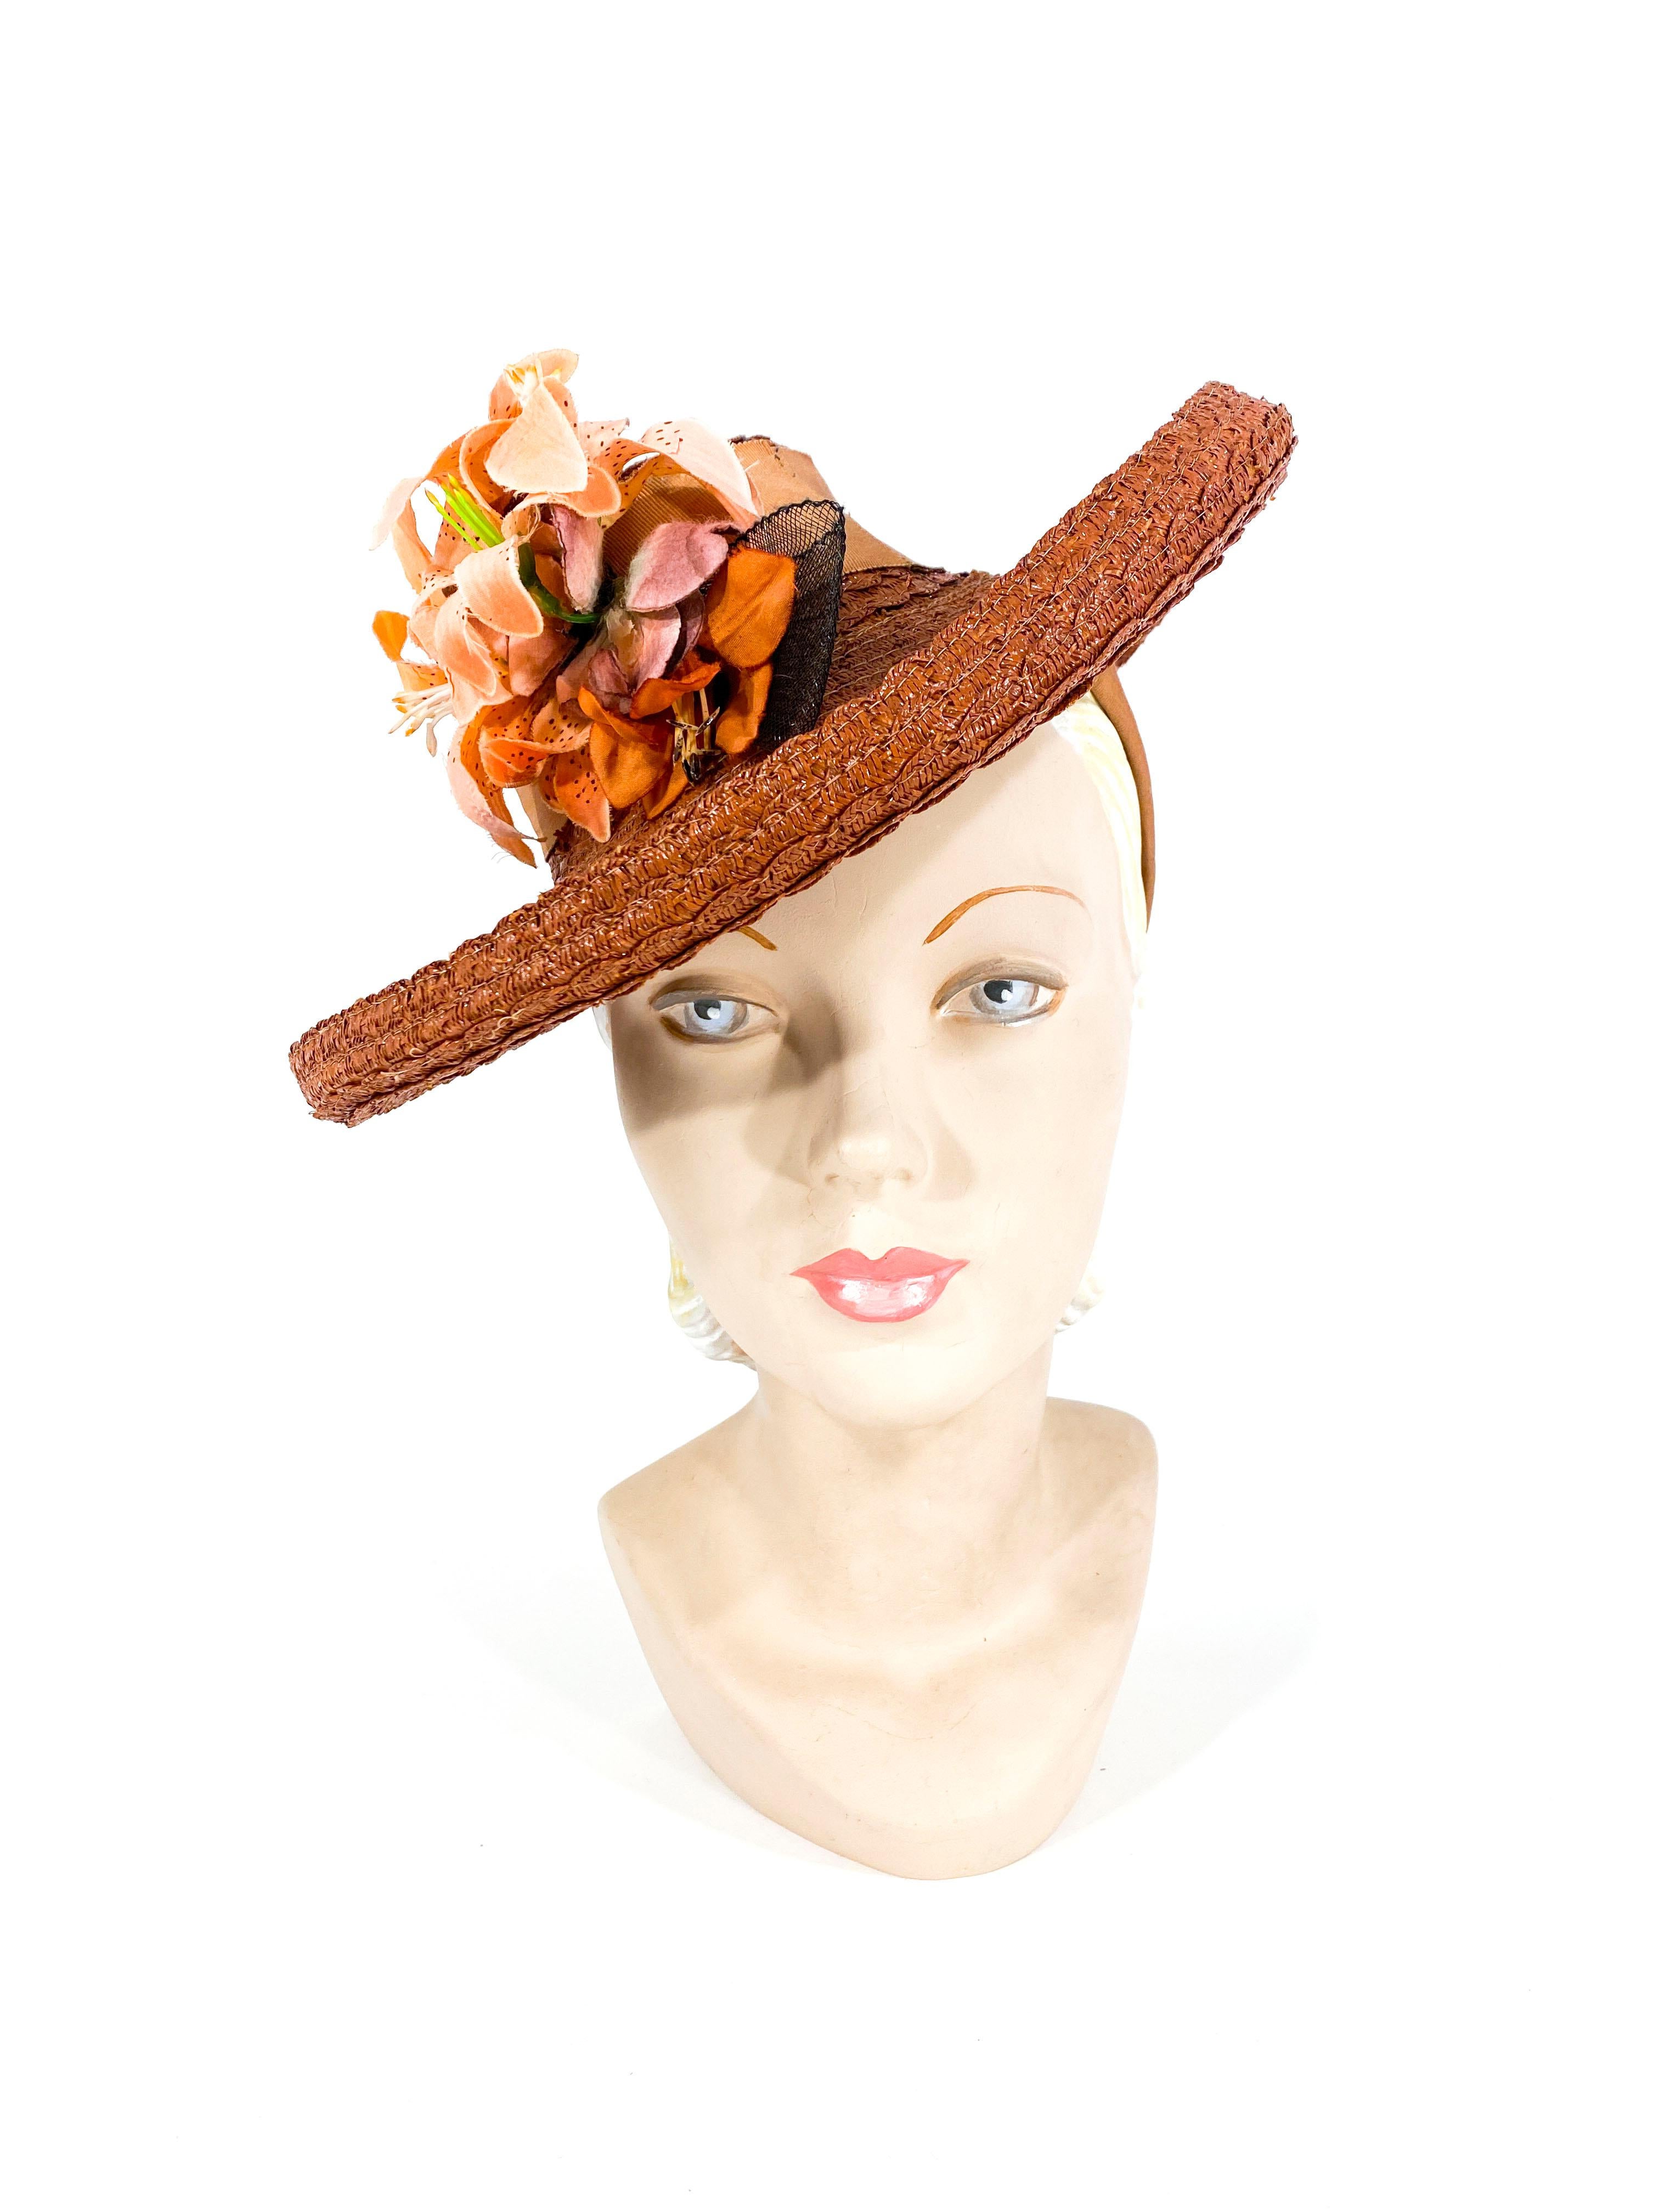 1930s rust colored coated straw hat made of rows of scalloped weaving along the crown and curled brim. The crown is styled like a toy hat with perch grosgrain bands that are worn on the back of the head. The top of the hat is also adorned with wide